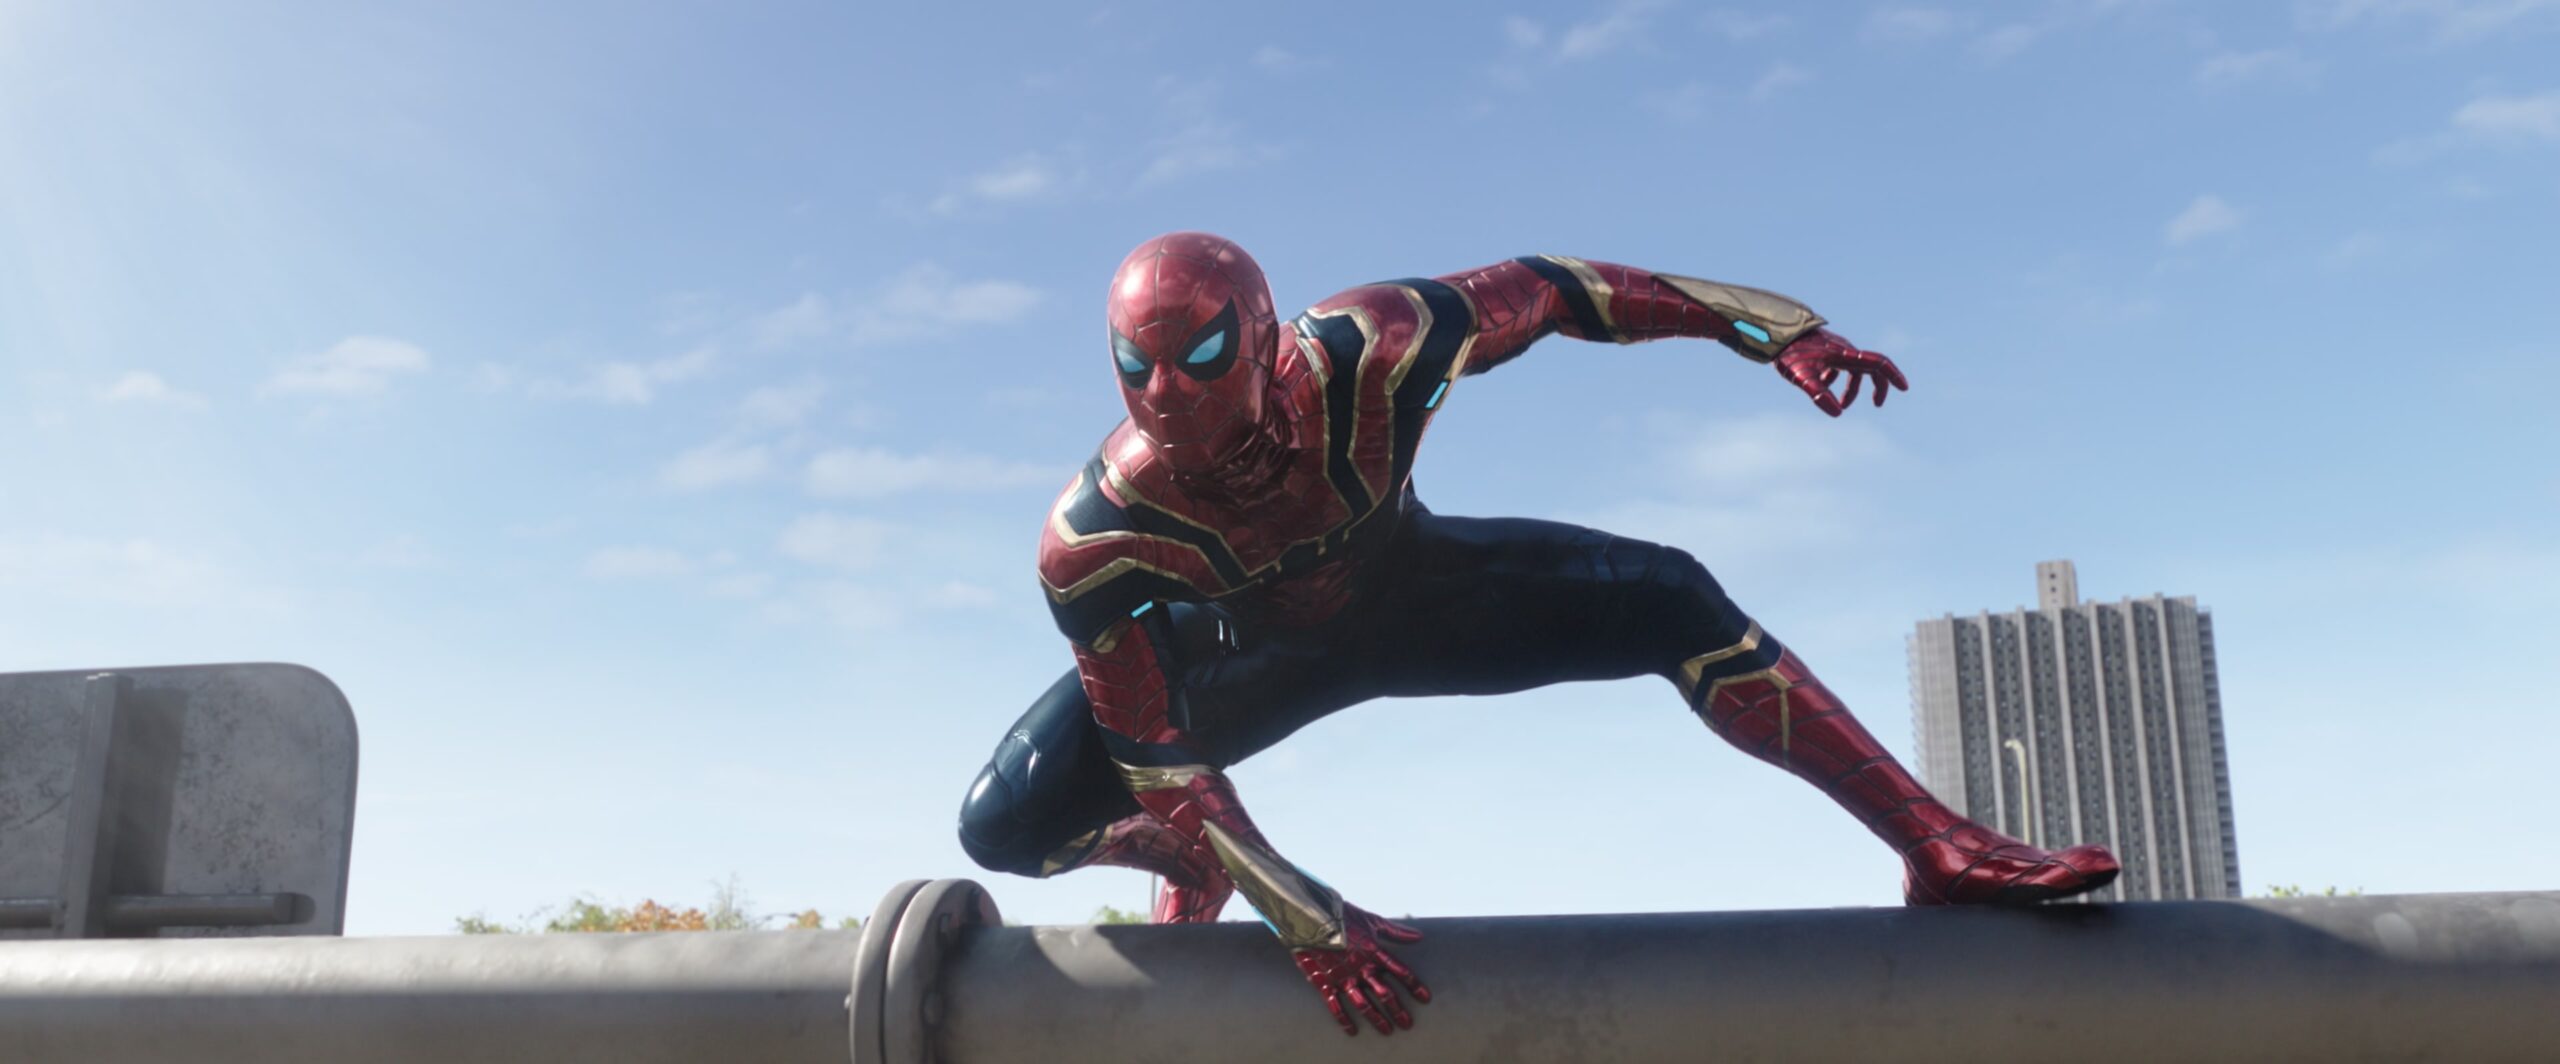 Spider-Man (Tom Holland) responds to reports of a super-villain attack in Spider-Man: No Way Home (2021), Marvel Entertainment